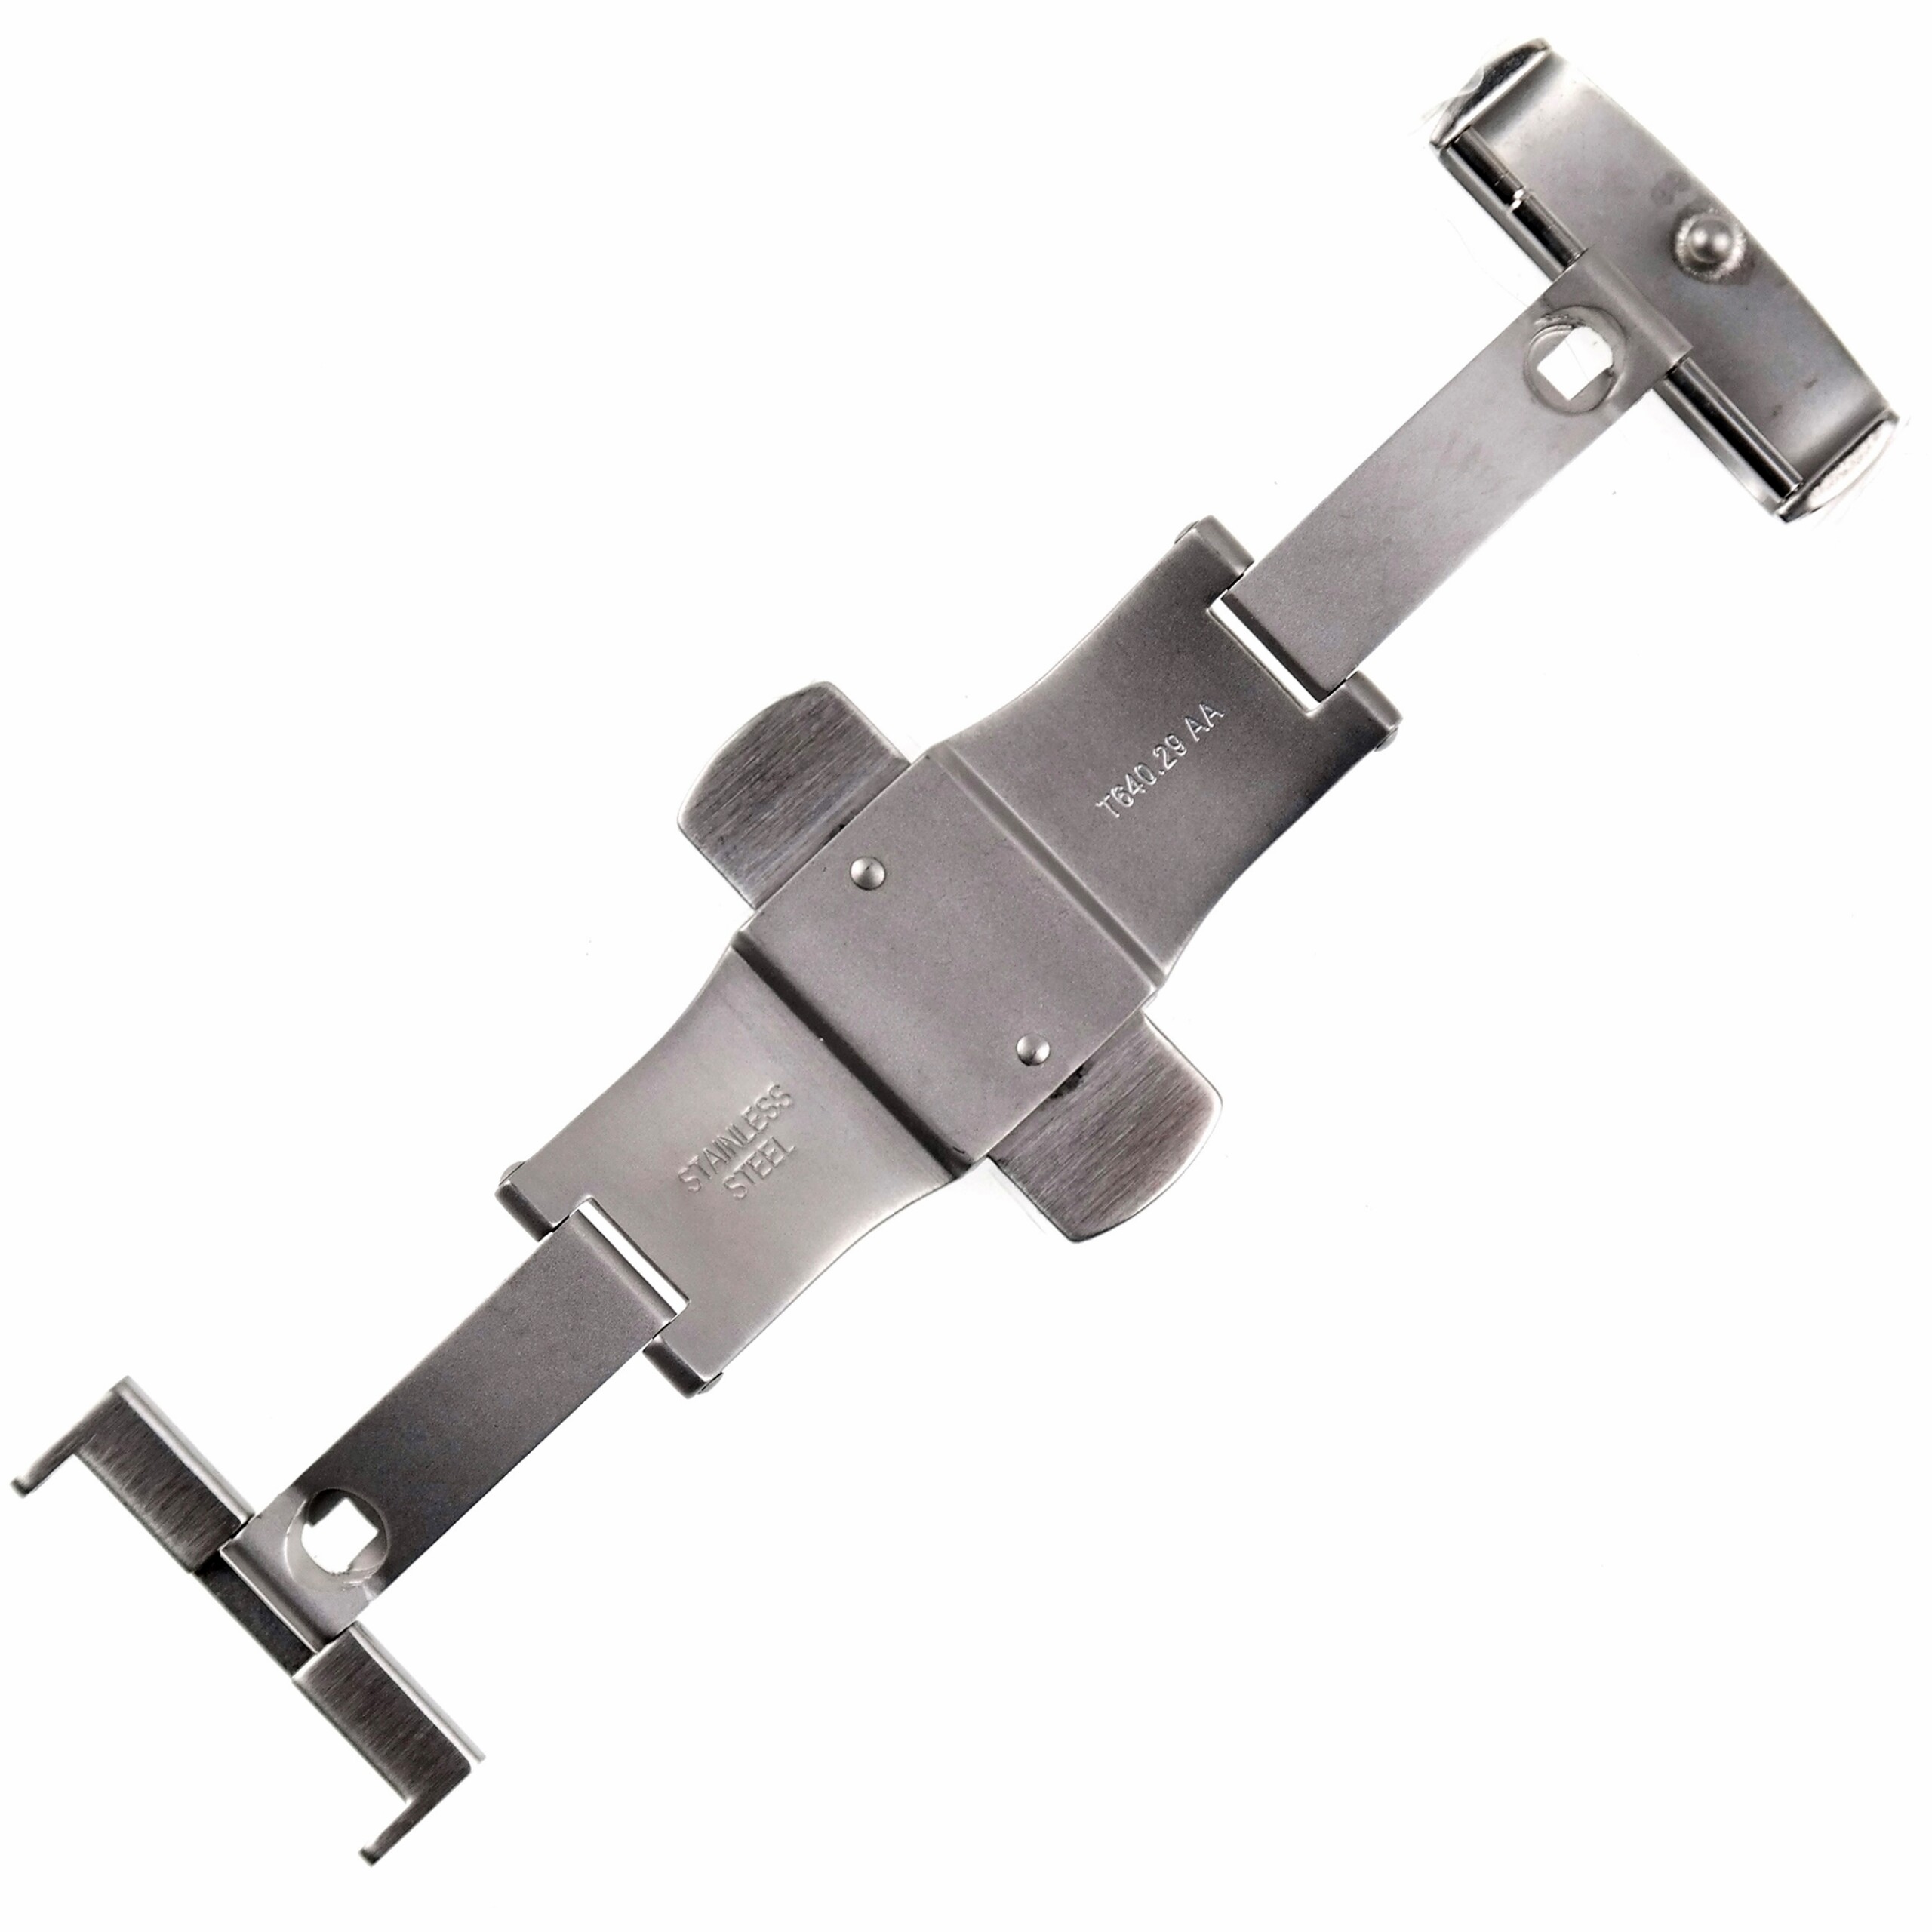 FREDERIQUE CONSTANT - Deployant/Folding Clasp - 18 mm Buckle - Swiss Made